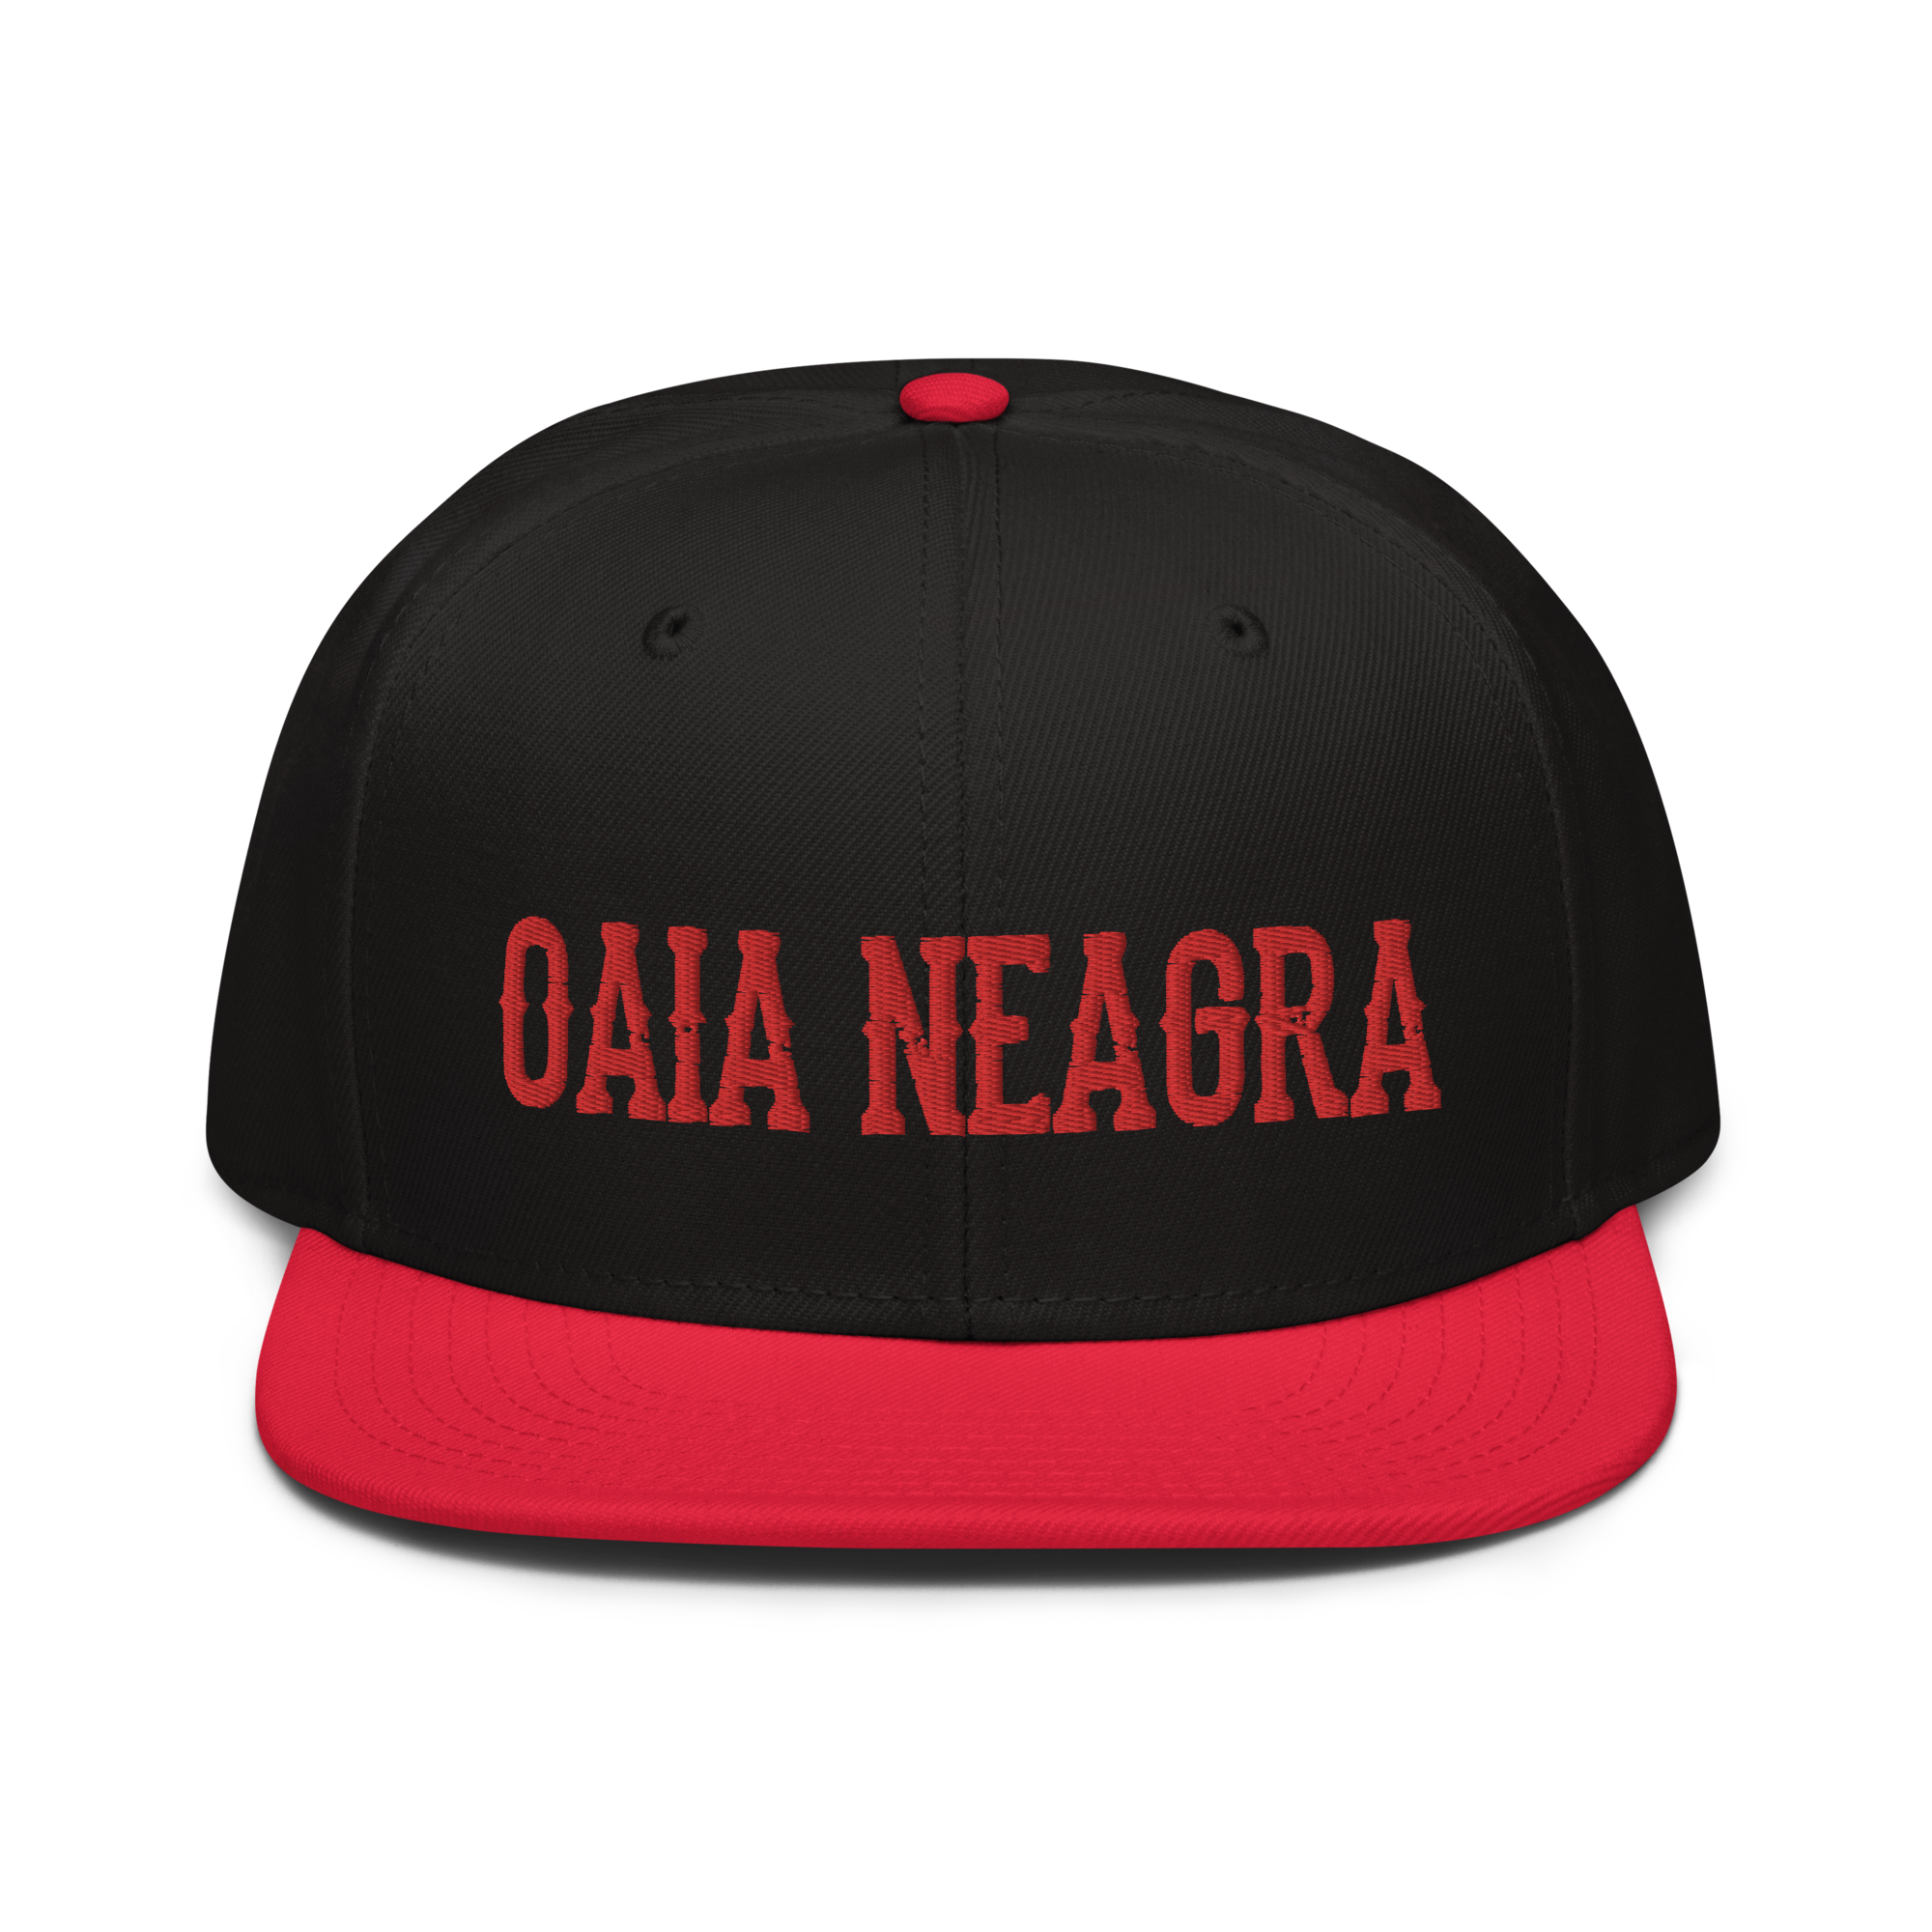 Red Pack - Oaia Neagra